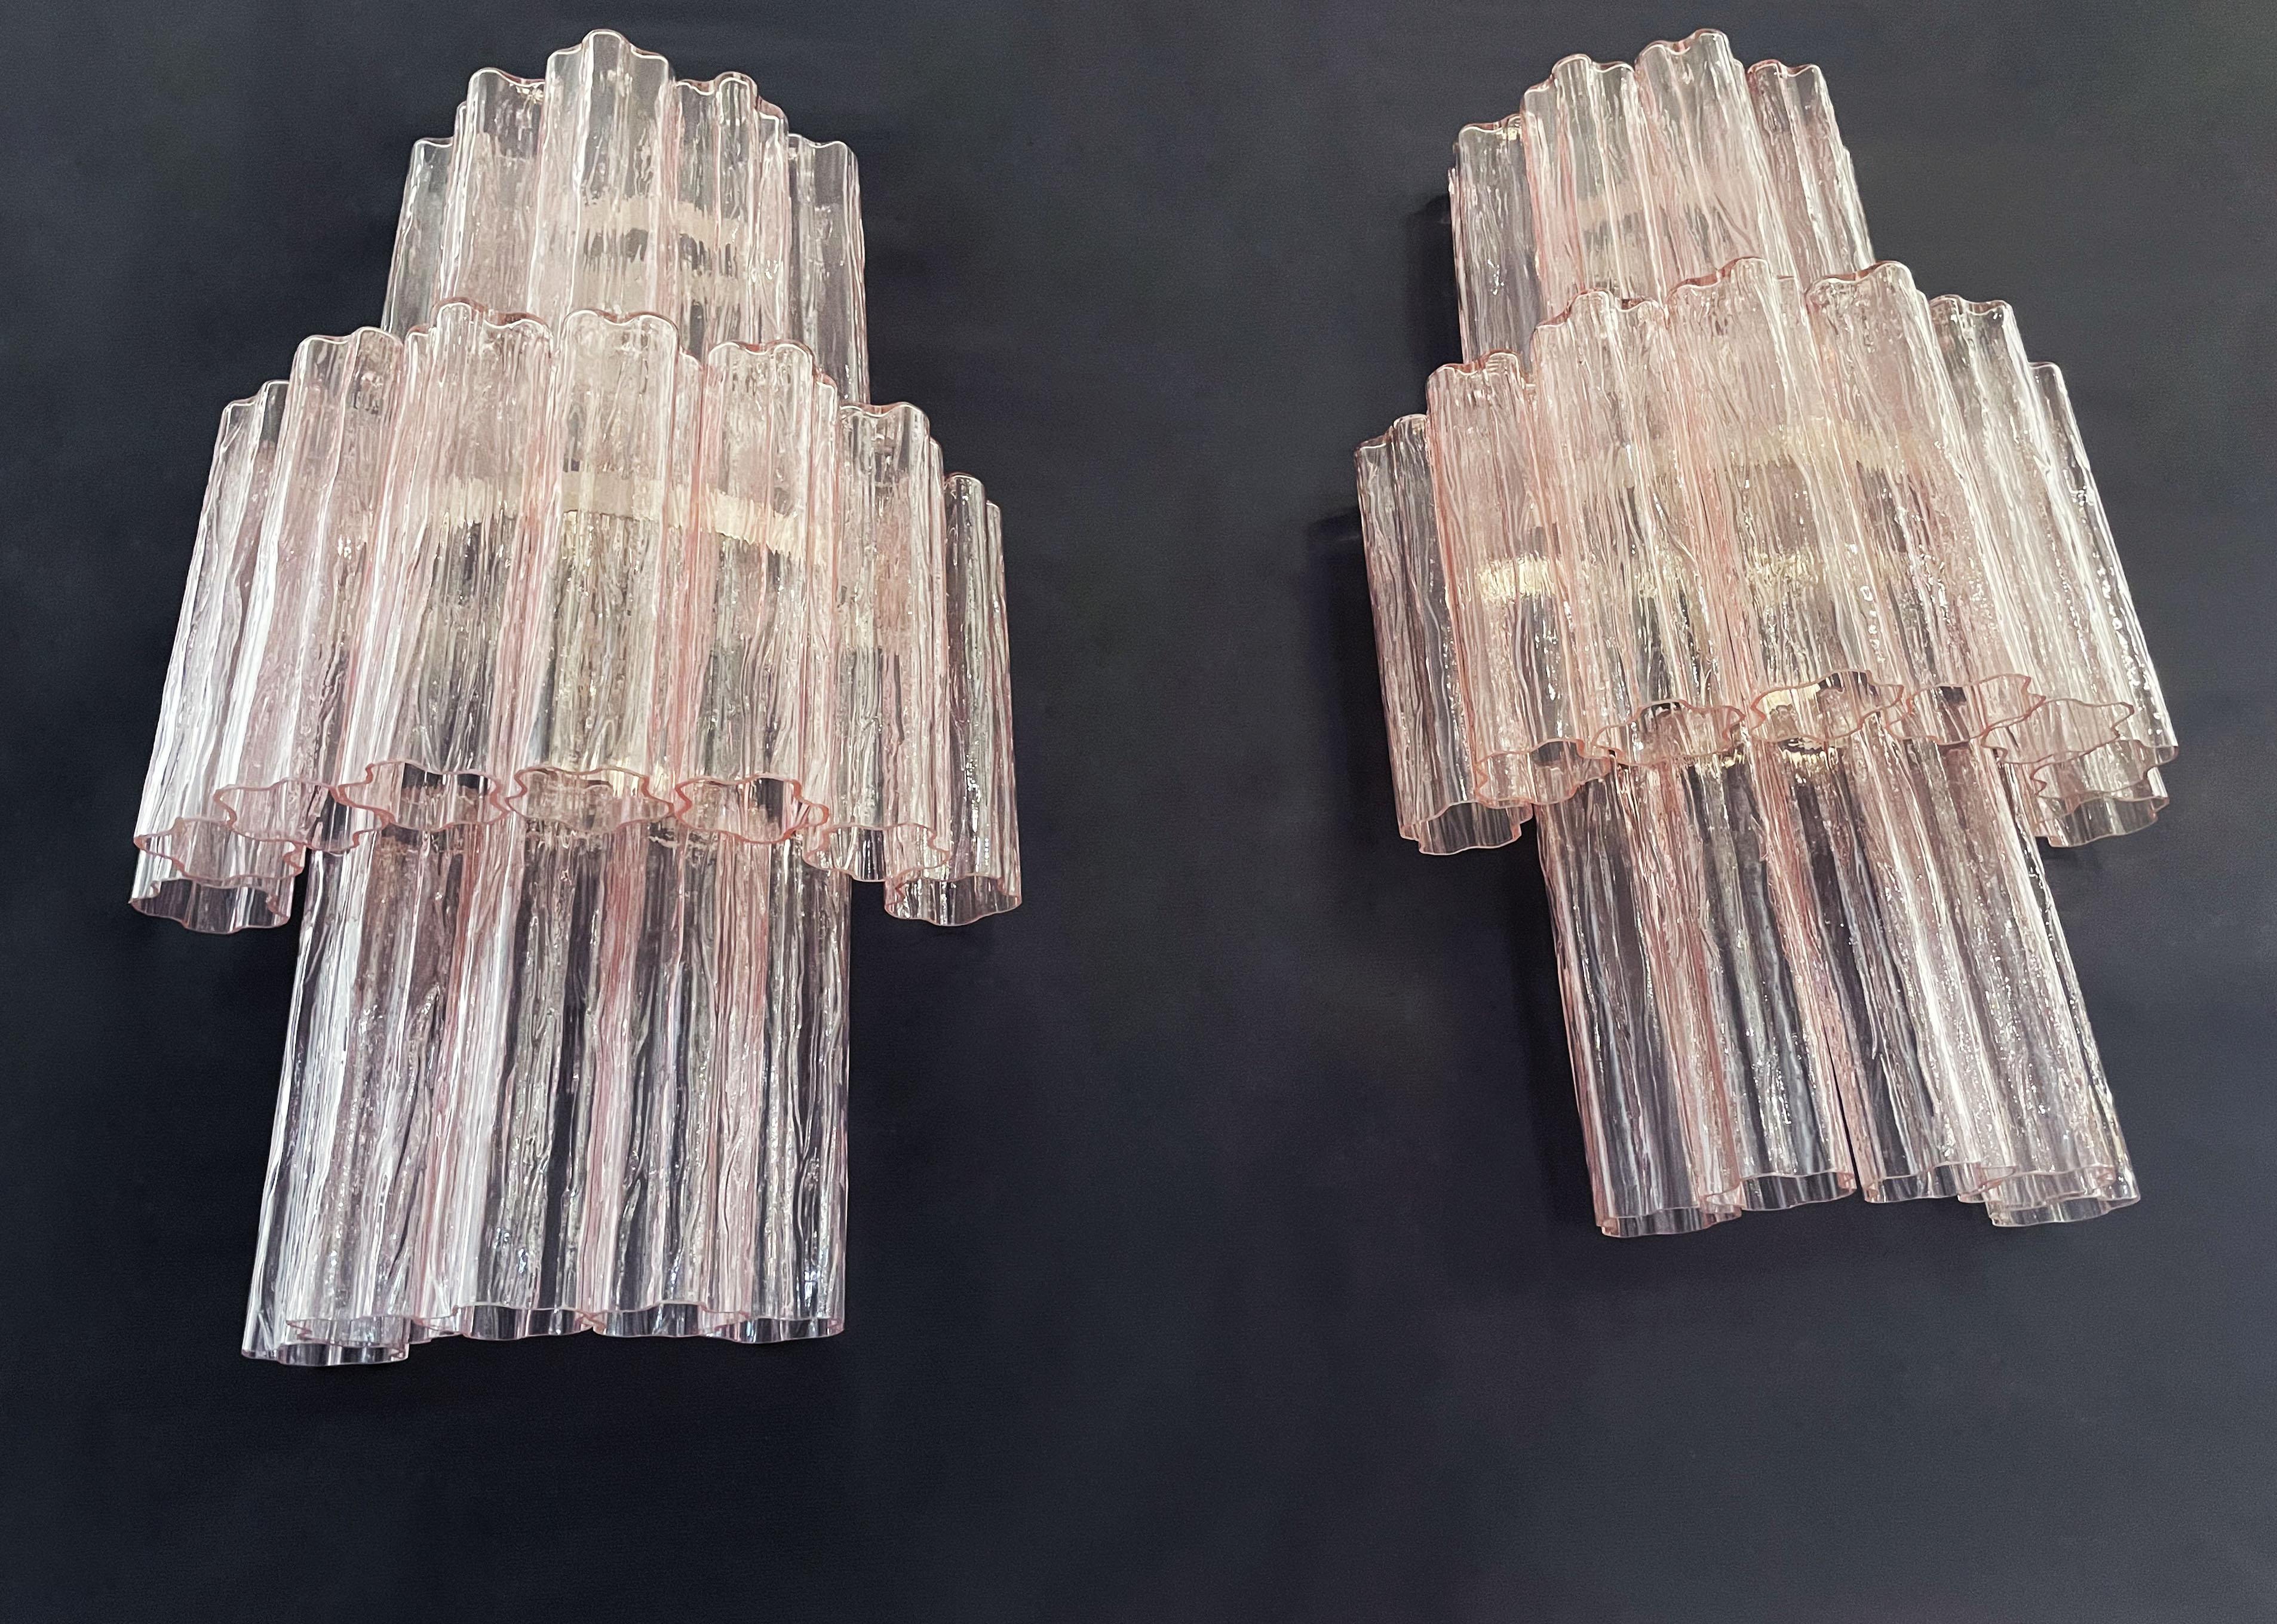 Italian vintage pair of wall sconces in Murano glass and nickel-plated metal structure. The armor polished nickel supports 18 large pink glass tubes in a star shape for each lamp.
Period:	late XX century
Dimensions:	29 inches height (75 cm); 17